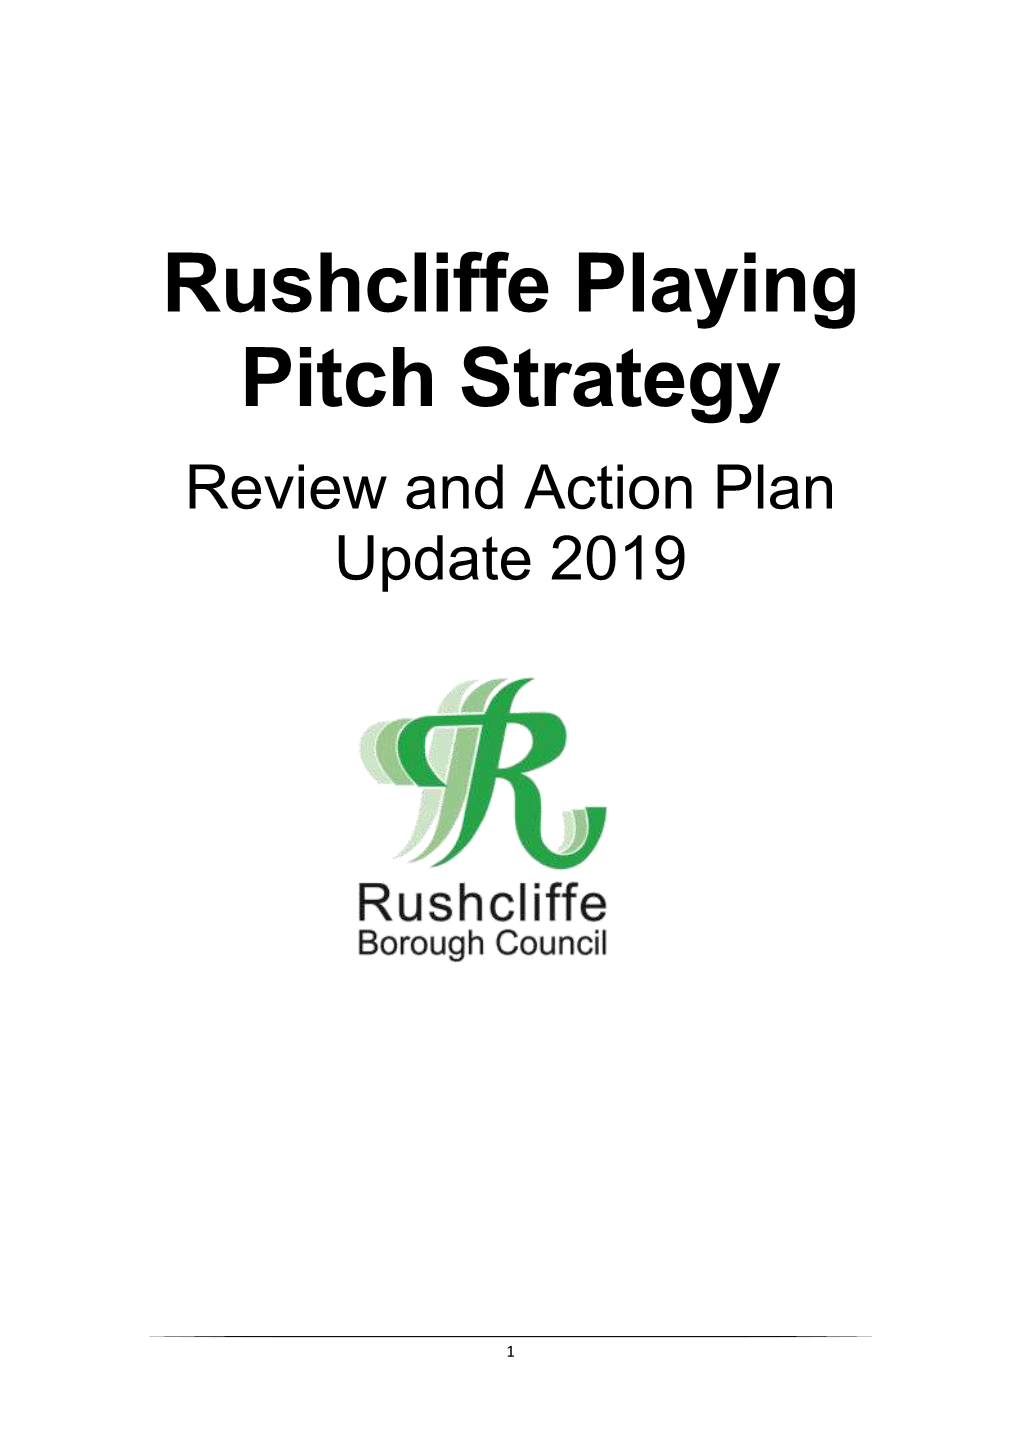 Rushcliffe Playing Pitch Strategy – Review and Action Plan Update 2019